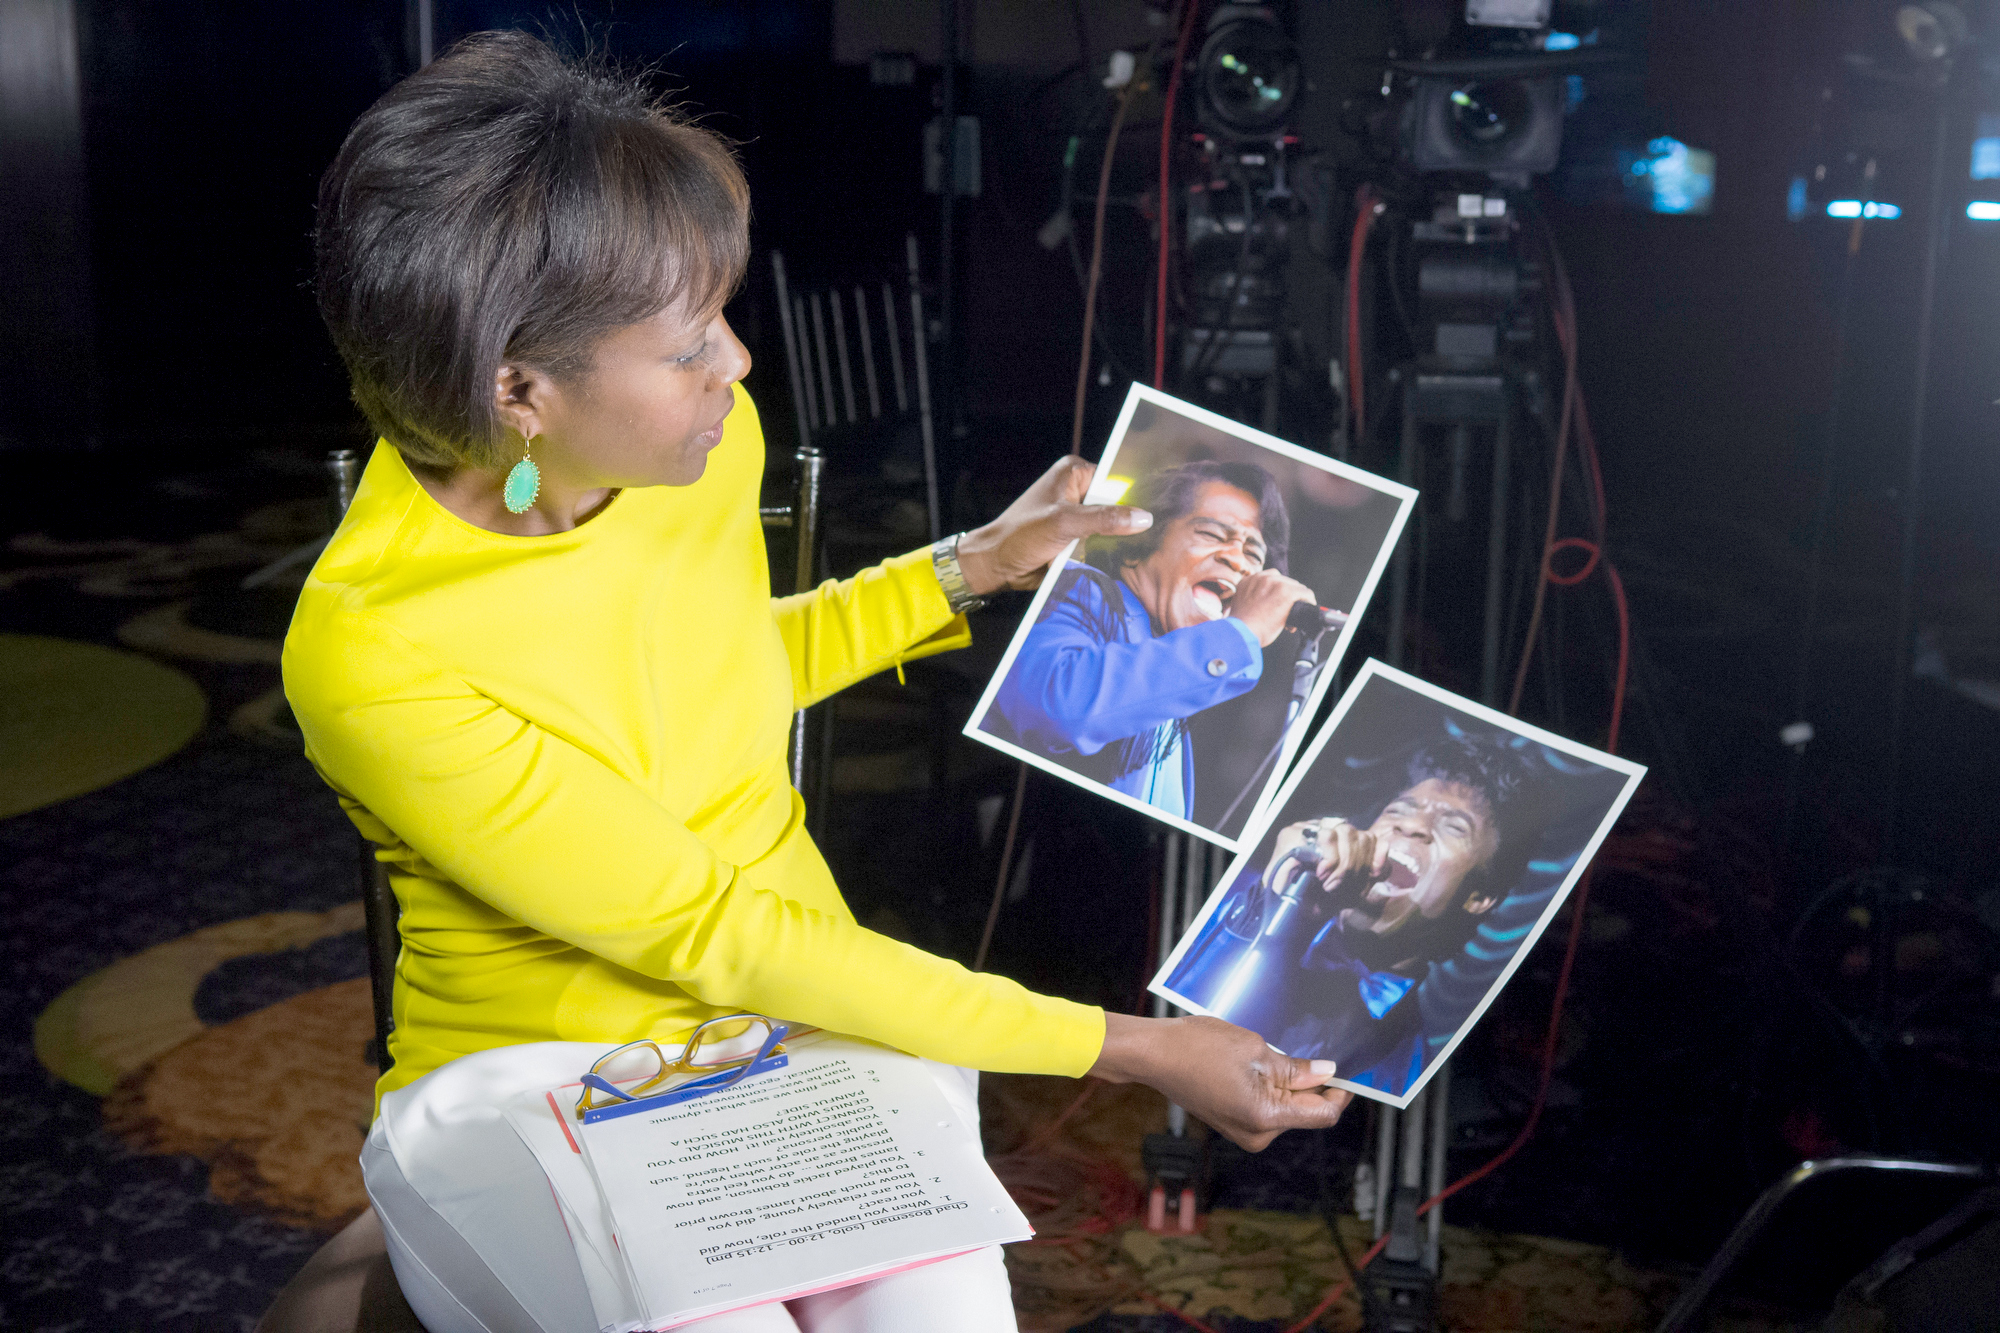 PHOTO: ABC's Deborah Roberts holds a photo of the real James Brown next to a photo of actor Chadwick Boseman playing the music legend in the new biopic, "Get On Up."